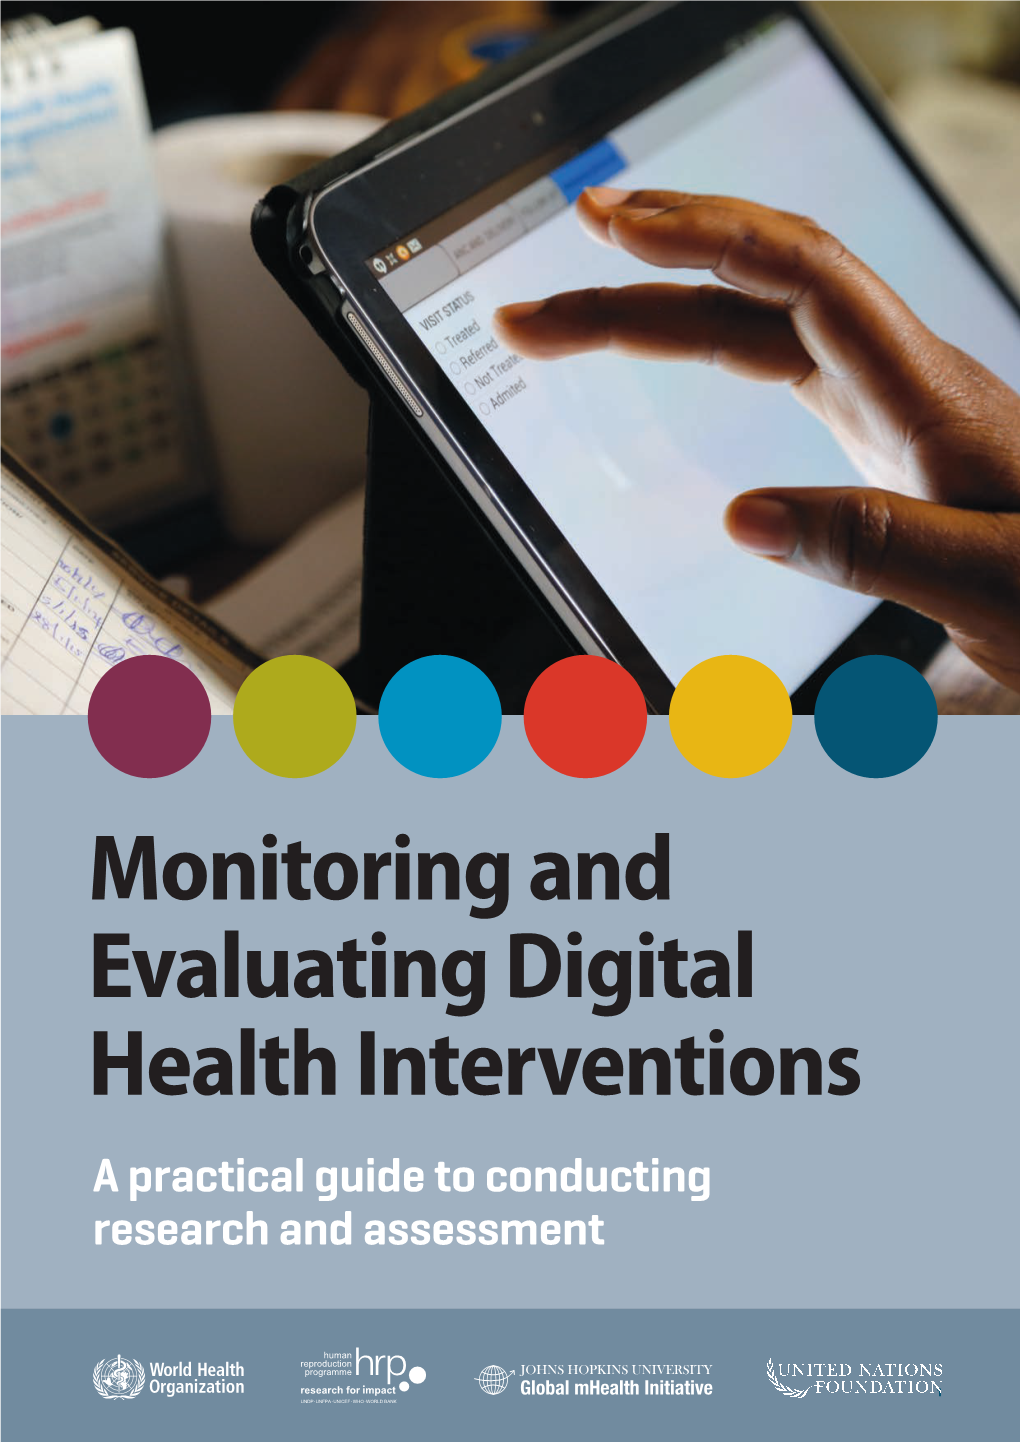 Monitoring and Evaluating Digital Health Interventions: a Practical Guide to Conducting Research and Assessment